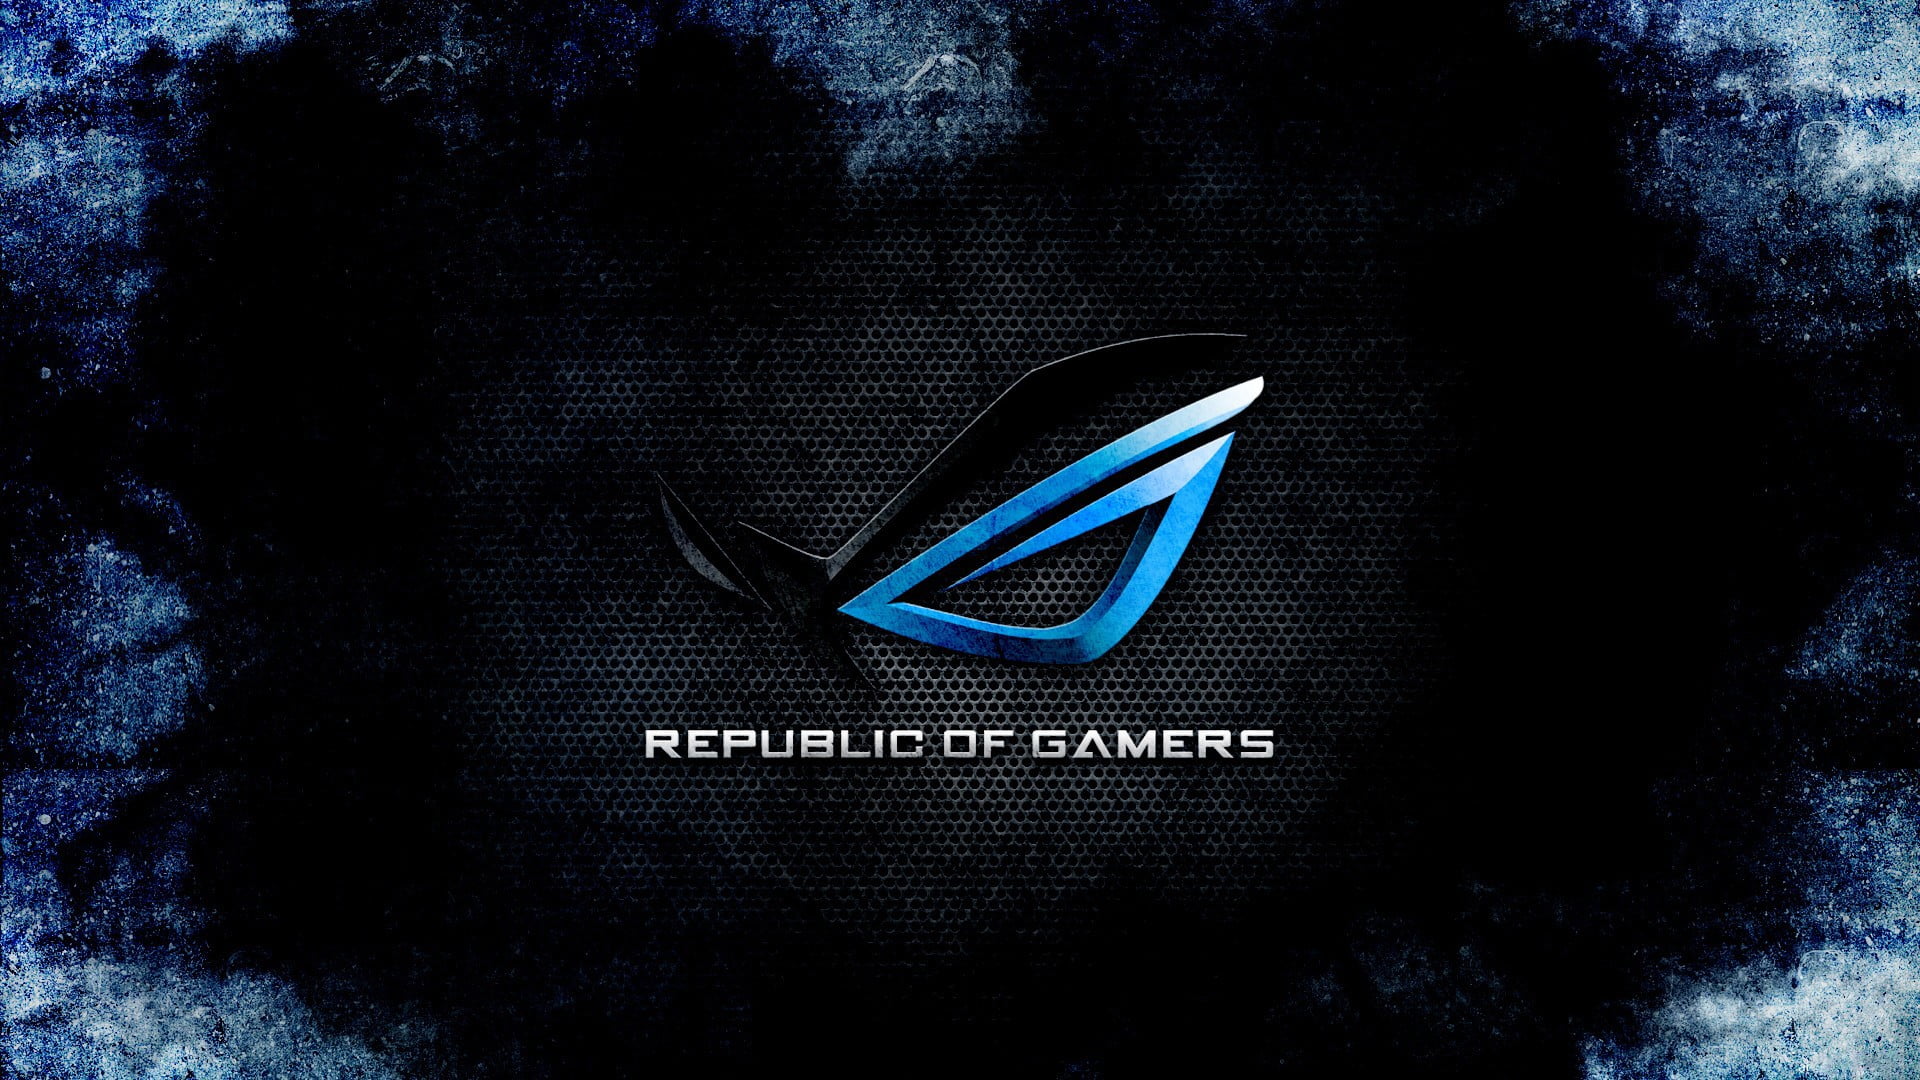 ASUS Republic of Gamers wallpaper, communication, blue, text